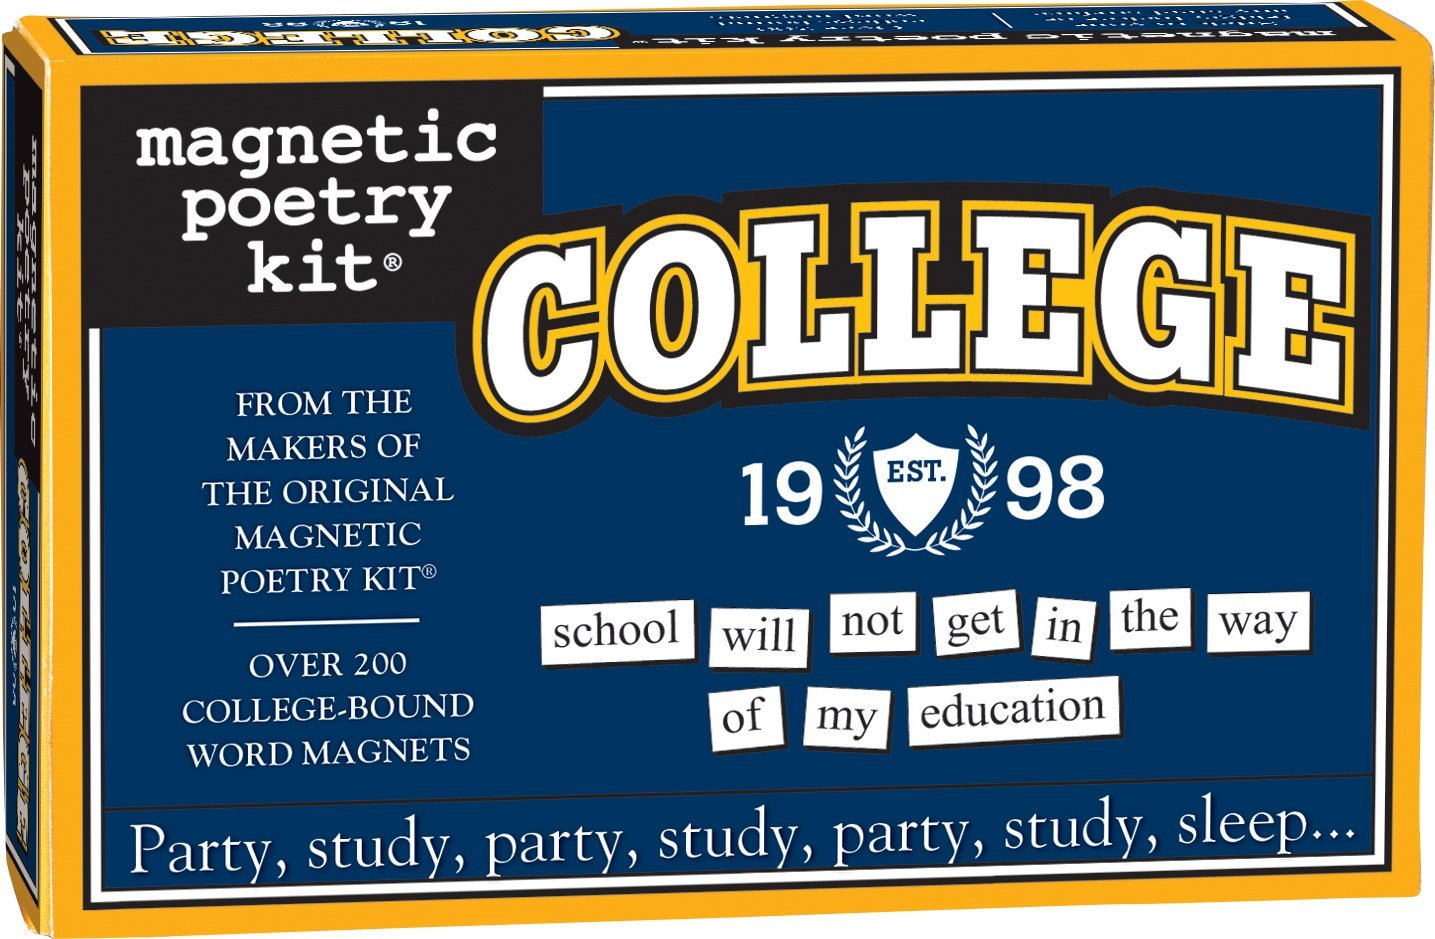 Magnetic Poetry Kit- College Edition: $12.95 on Amazon